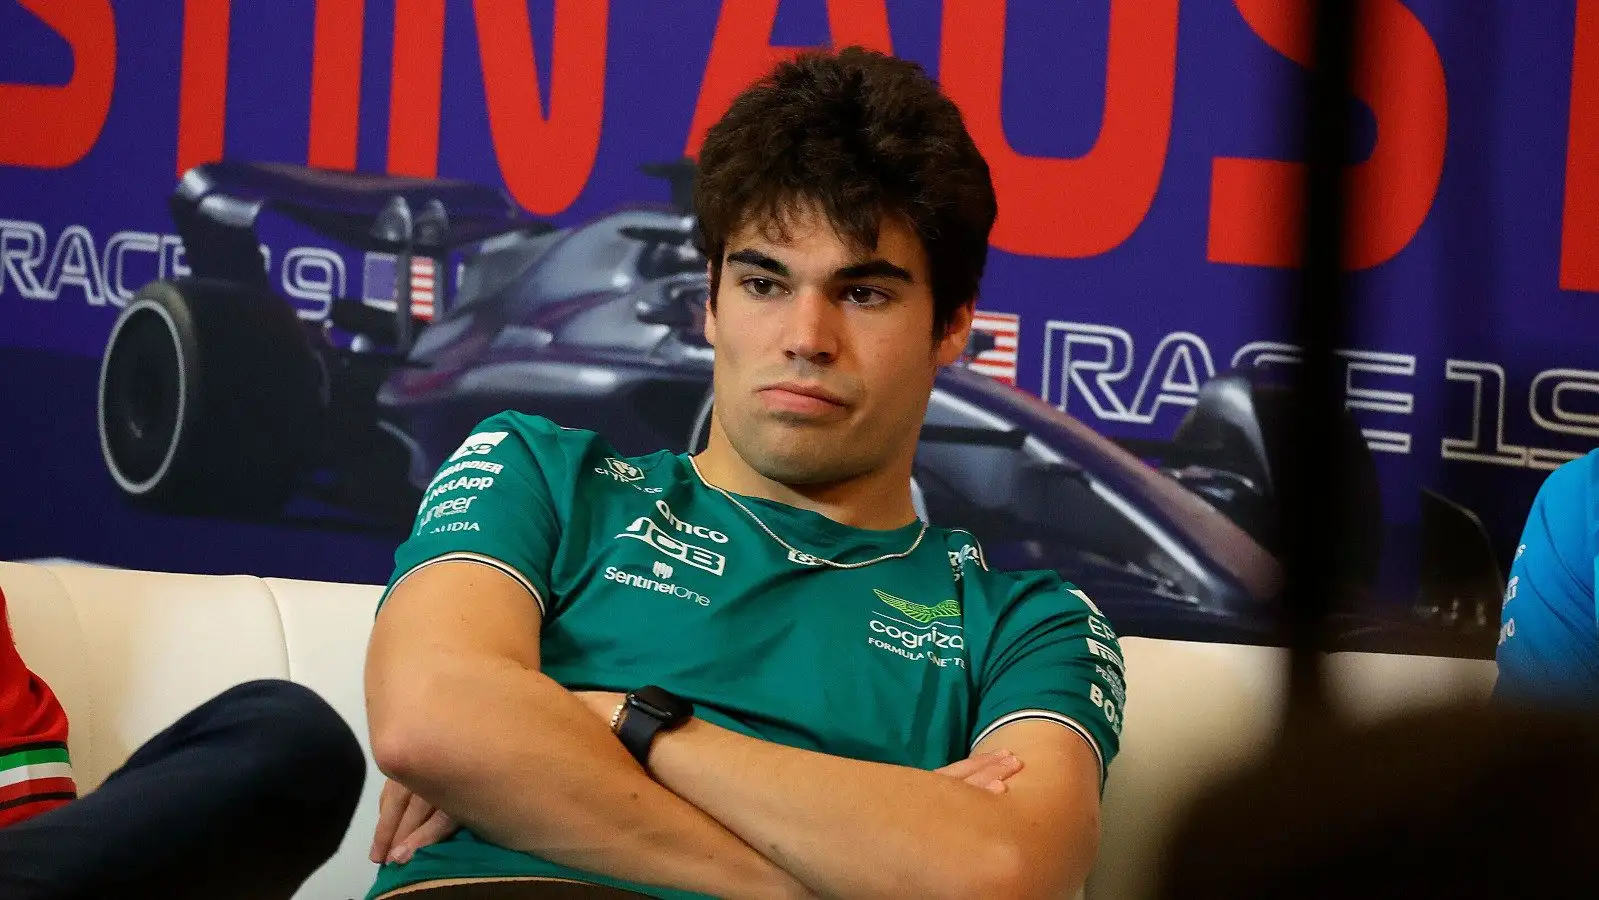 Aston Martin driver Lance Stroll arms crossed in a press conference